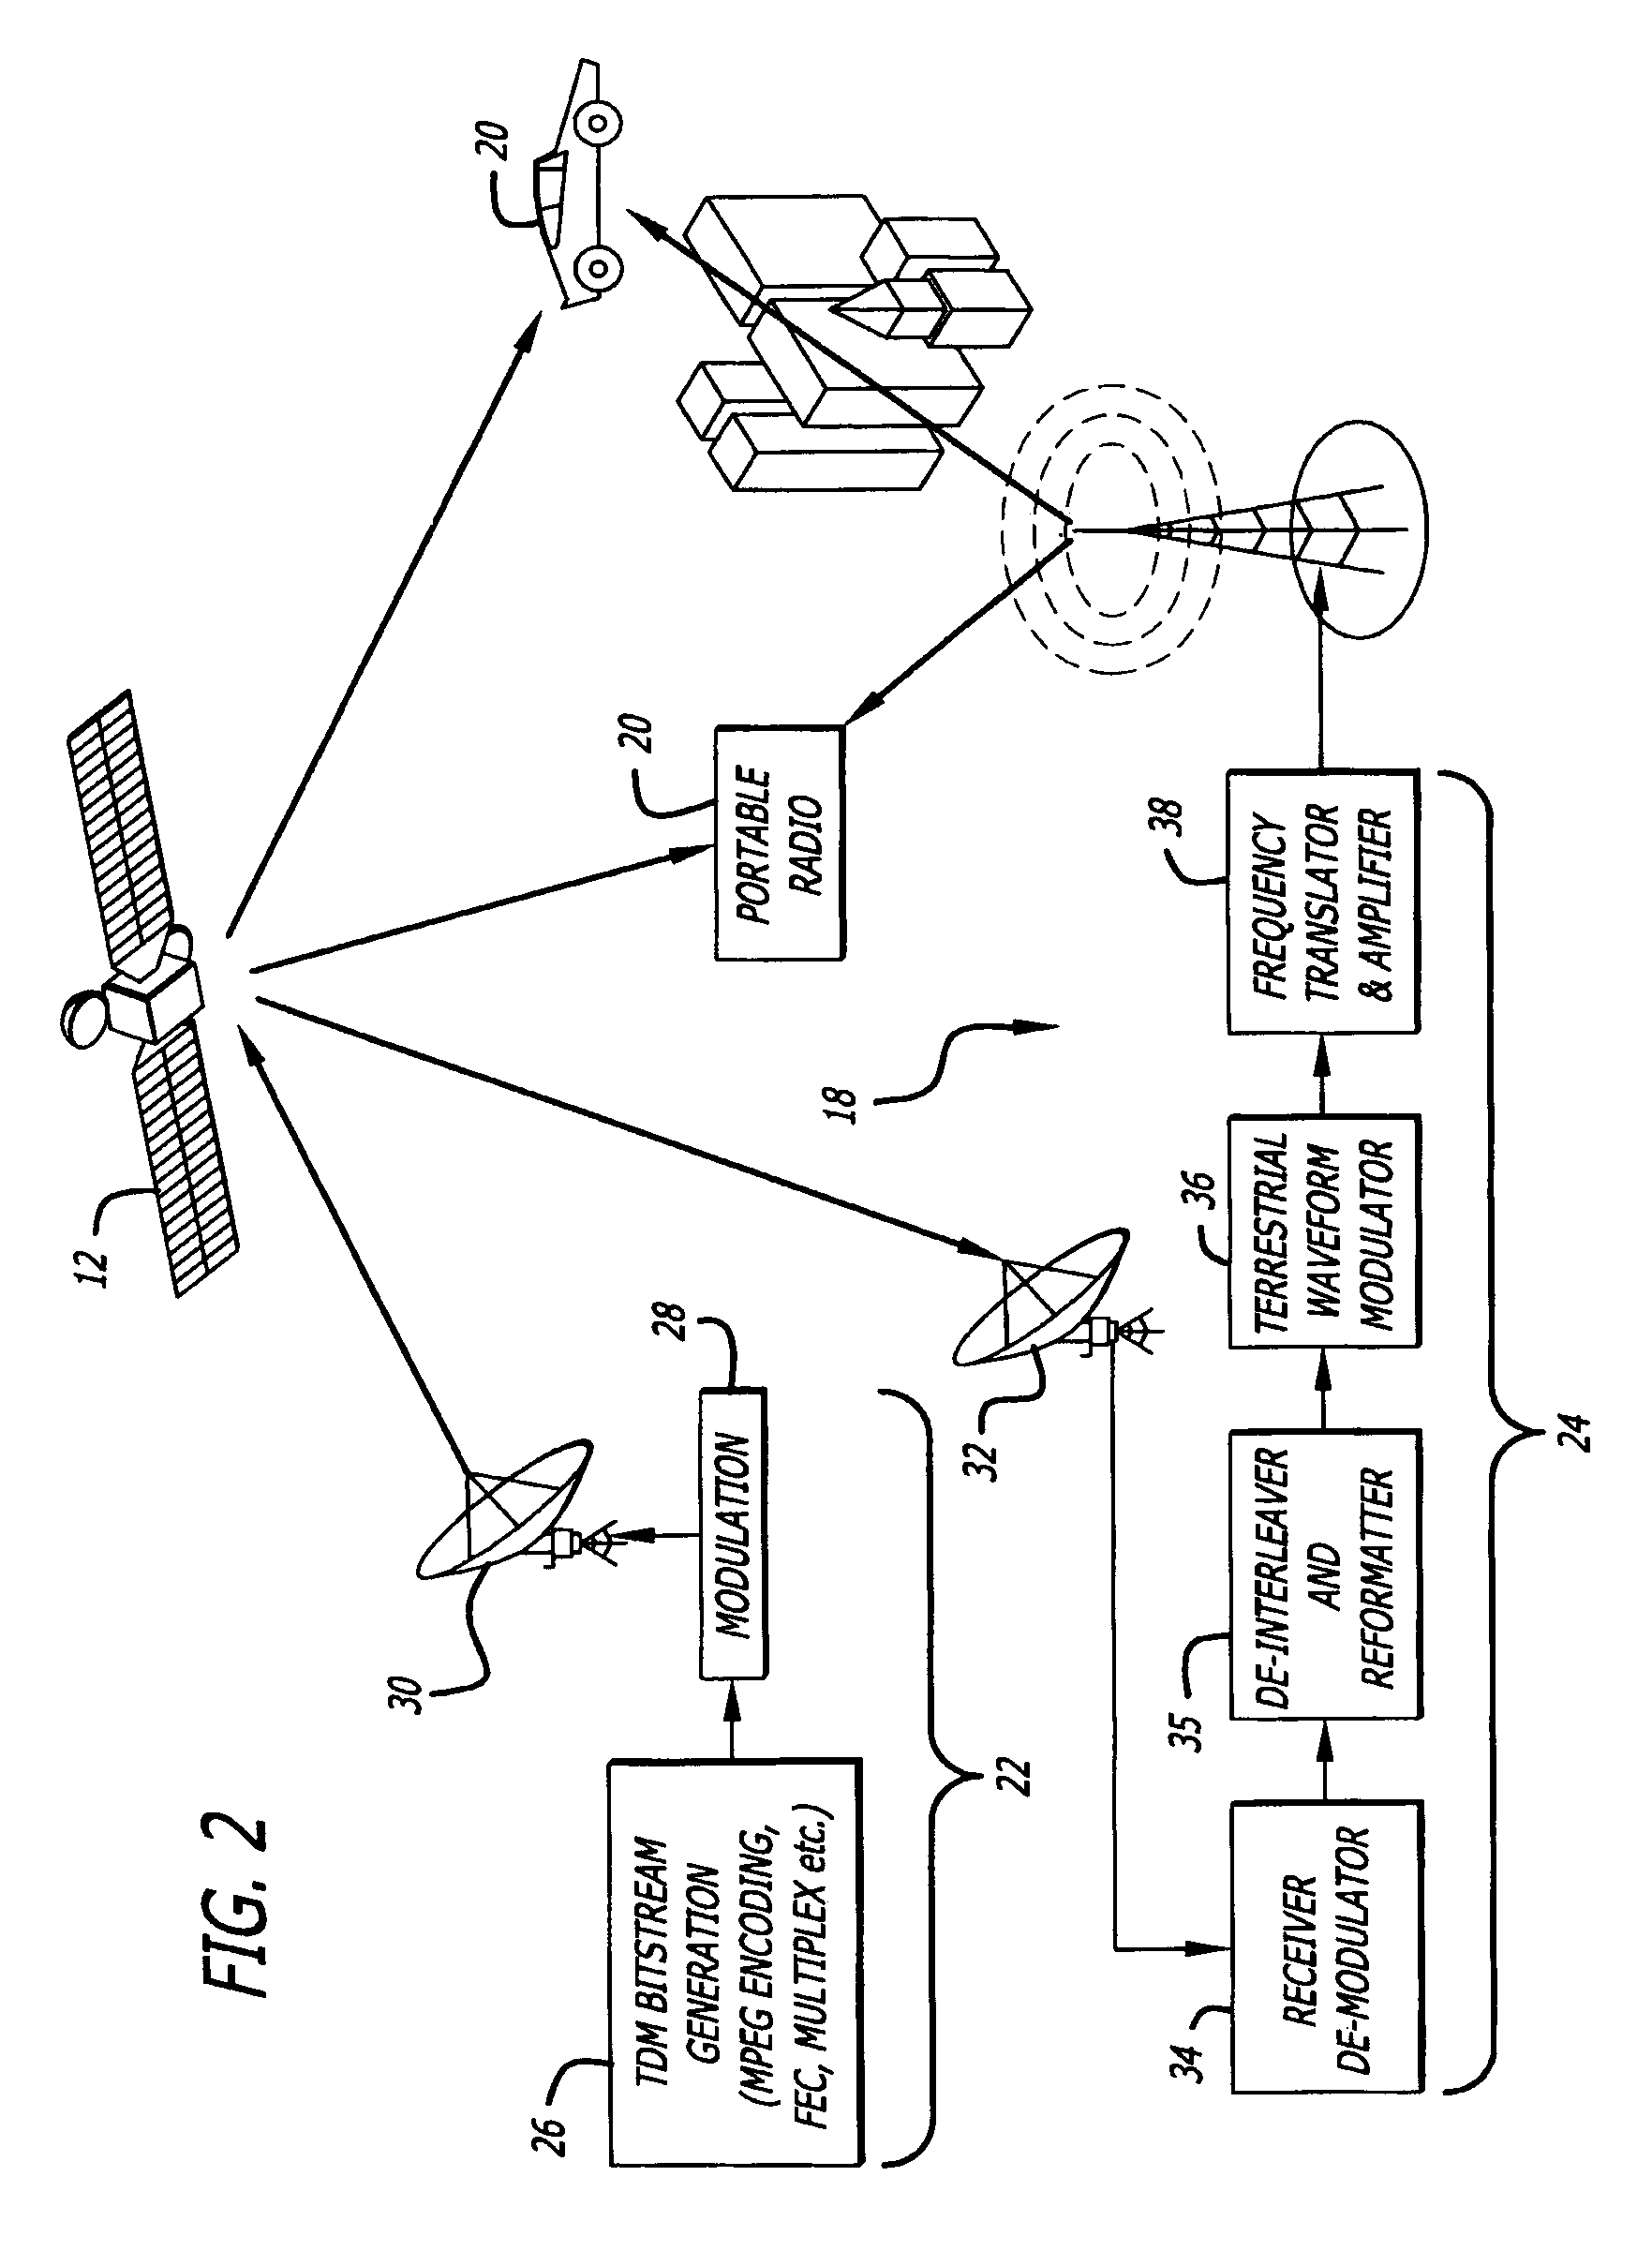 System and method for distributing music and data